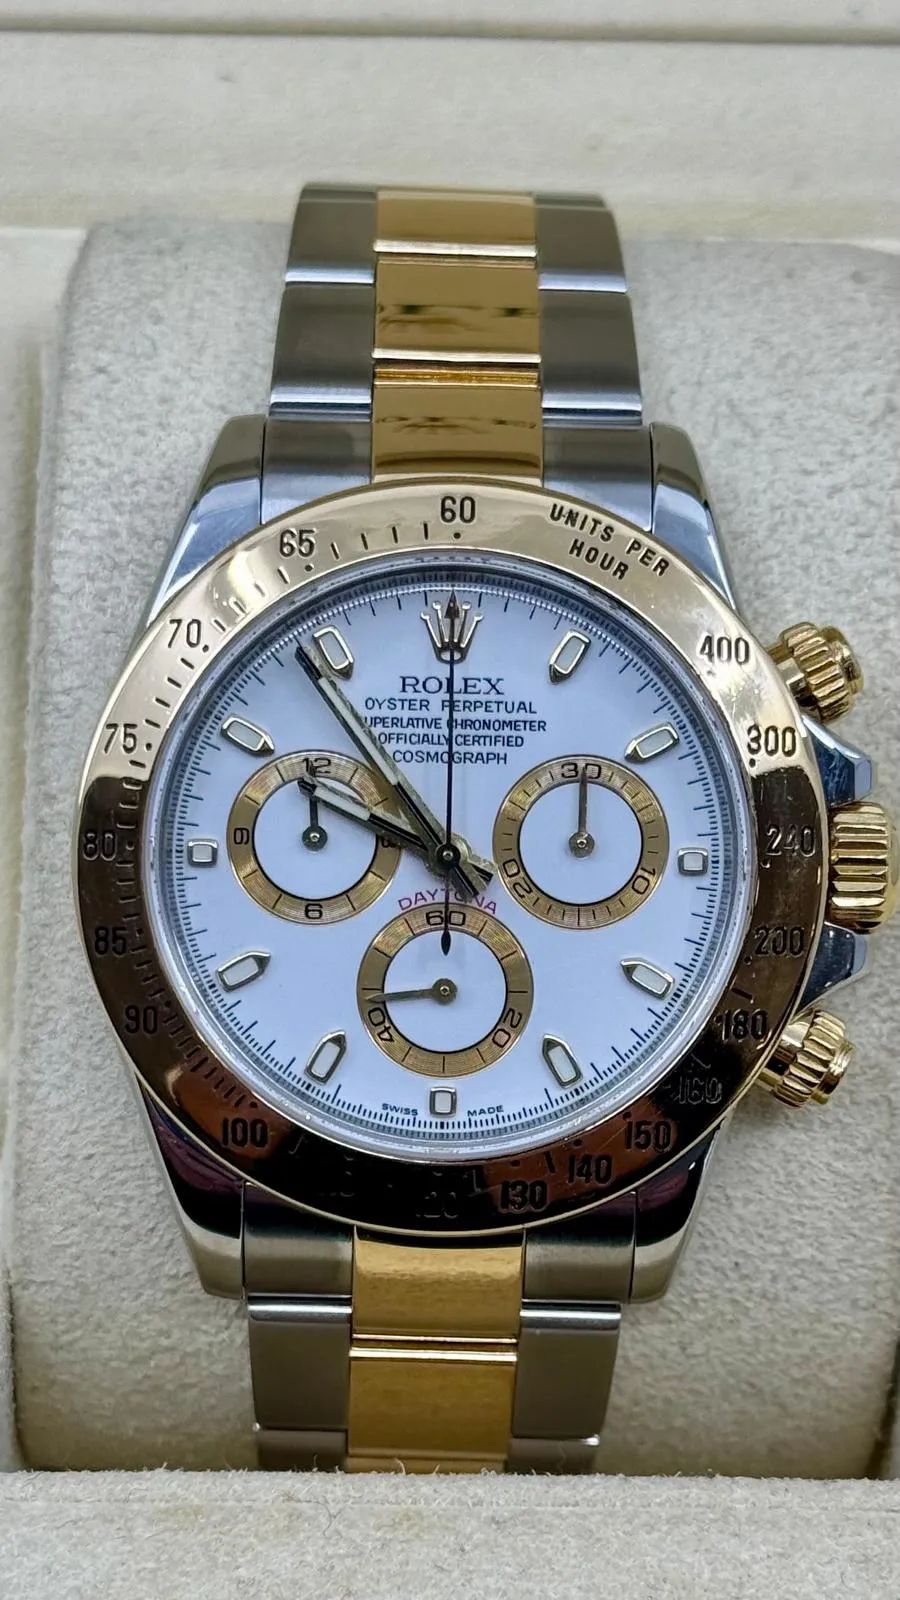 Rolex Daytona 116523 40mm Gold and stainless steel